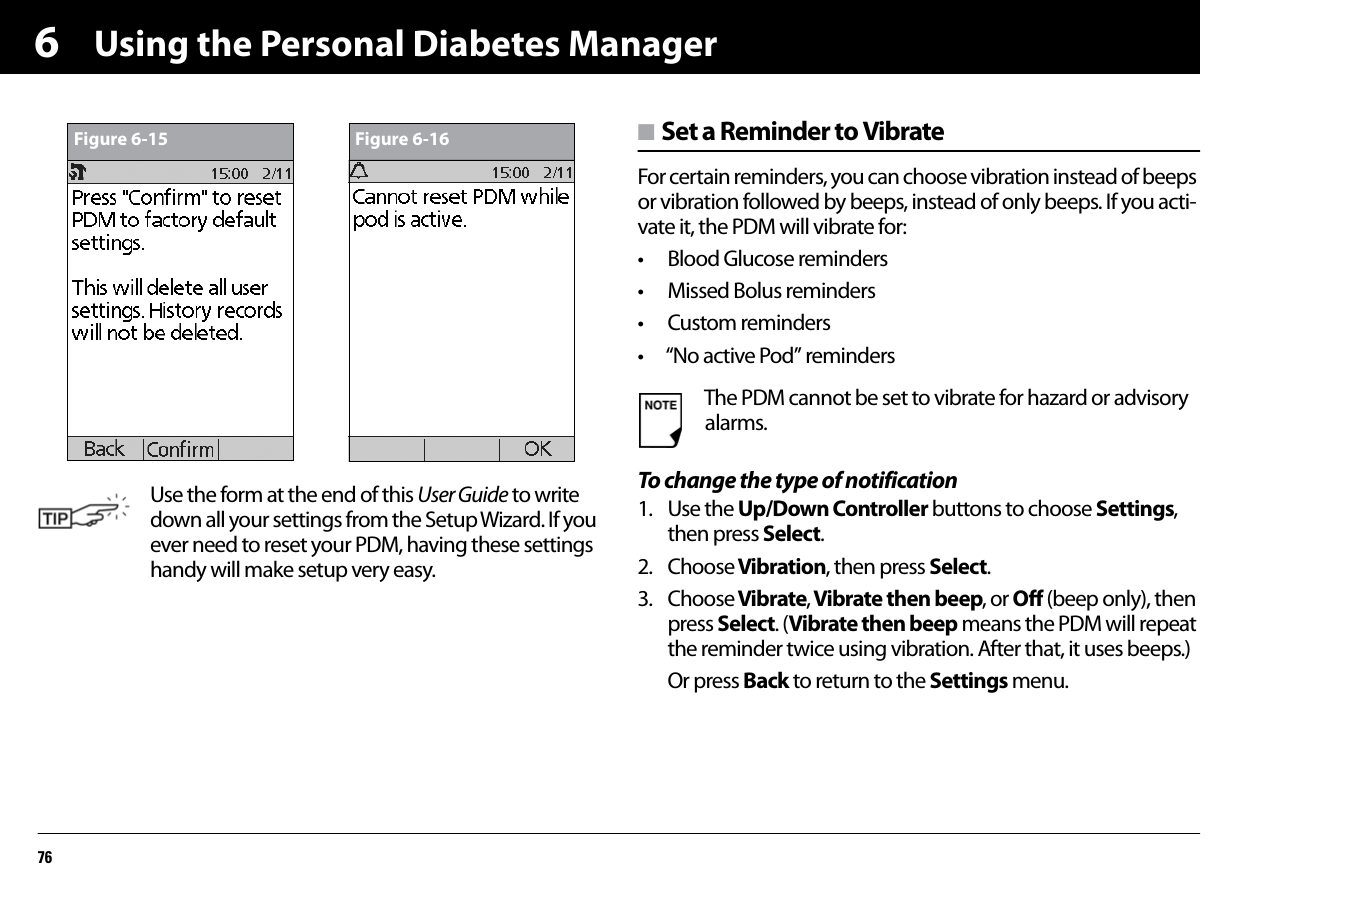 Using the Personal Diabetes Manager766n Set a Reminder to VibrateFor certain reminders, you can choose vibration instead of beeps or vibration followed by beeps, instead of only beeps. If you acti-vate it, the PDM will vibrate for:• Blood Glucose reminders• Missed Bolus reminders• Custom reminders• “No active Pod” remindersTo change the type of notification1. Use the Up/Down Controller buttons to choose Settings, then press Select.2. Choose Vibration, then press Select.3. Choose Vibrate, Vibrate then beep, or Off (beep only), then press Select. (Vibrate then beep means the PDM will repeat the reminder twice using vibration. After that, it uses beeps.)Or press Back to return to the Settings menu.Use the form at the end of this User Guide to write down all your settings from the Setup Wizard. If you ever need to reset your PDM, having these settings handy will make setup very easy.Figure 6-15 Figure 6-16The PDM cannot be set to vibrate for hazard or advisory alarms.